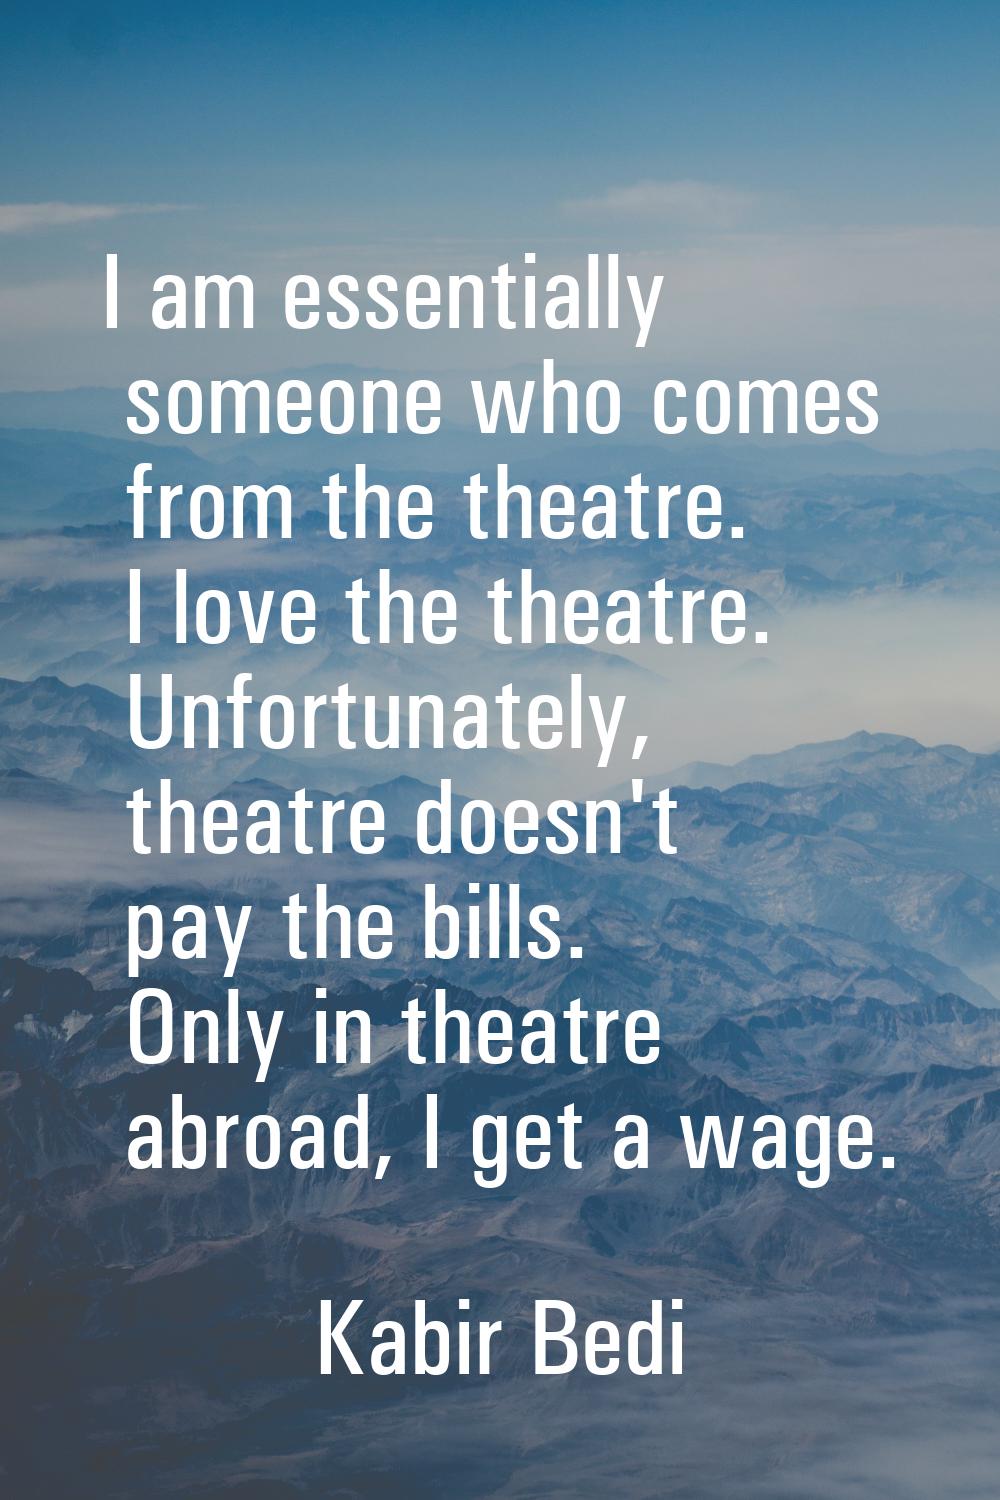 I am essentially someone who comes from the theatre. I love the theatre. Unfortunately, theatre doe